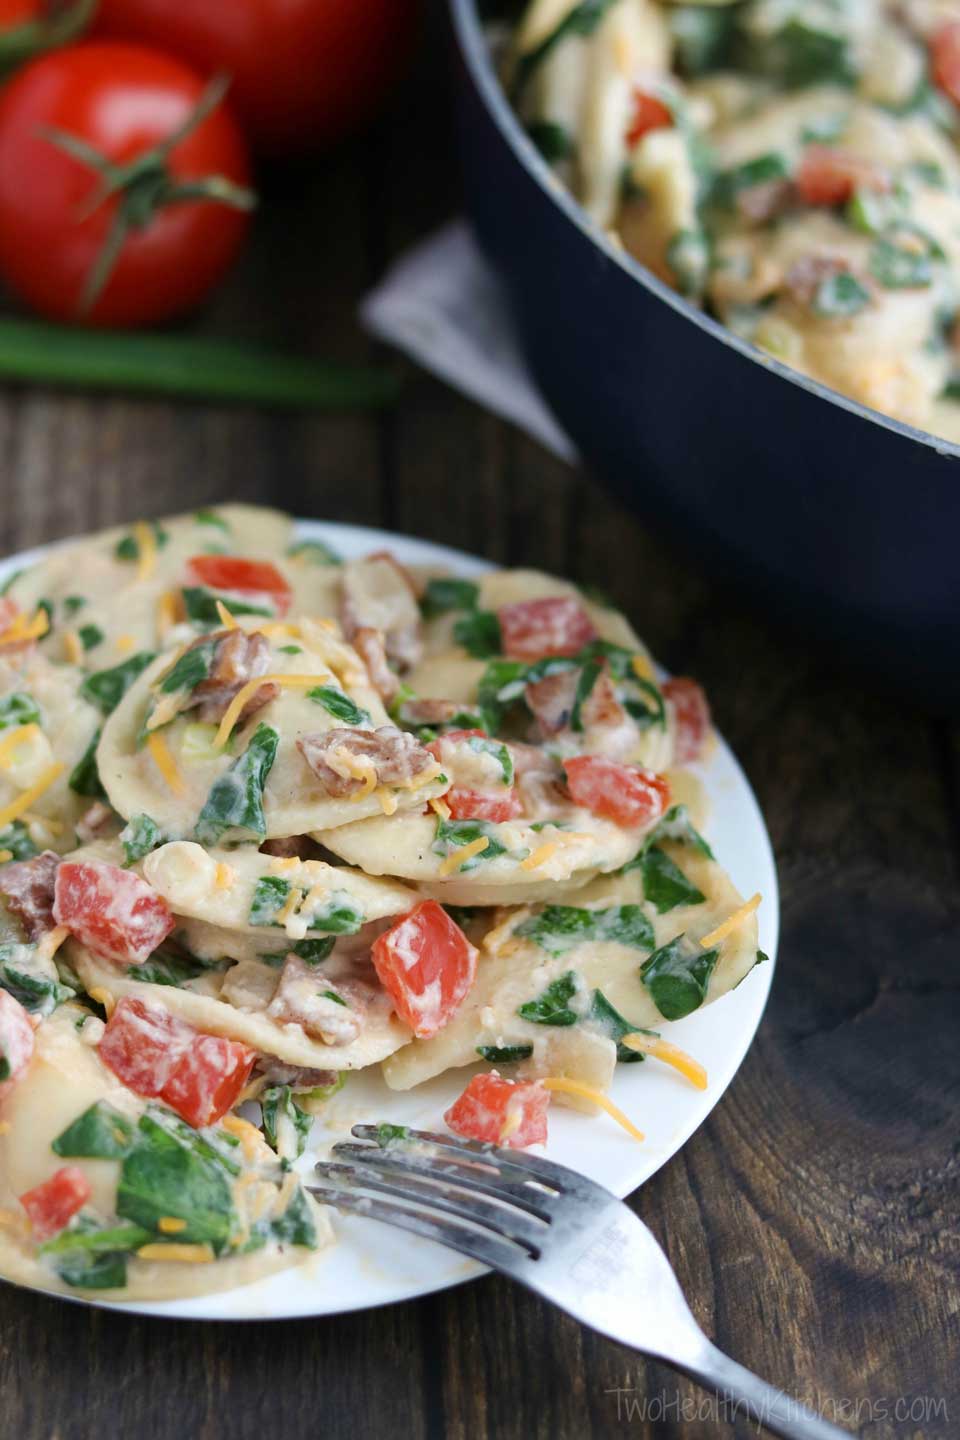 BLT flavor + a 2-cheese “alfredo” sauce make this healthy, quick and easy skillet meal a family favorite! It’s a 30 minute meal that can even be made ahead and quickly re-warmed later! Our Cheesy BLT Pierogi Skillet Dinner recipe is true comfort food with a satisfyingly fresh twist! Pillowy soft pierogies are draped in a creamy, rich and cheesy sauce and loaded up with vibrant BLT flavors! A deliciously healthy pierogi recipe your family will ask for again and again! | www.TwoHealthyKitchens.com